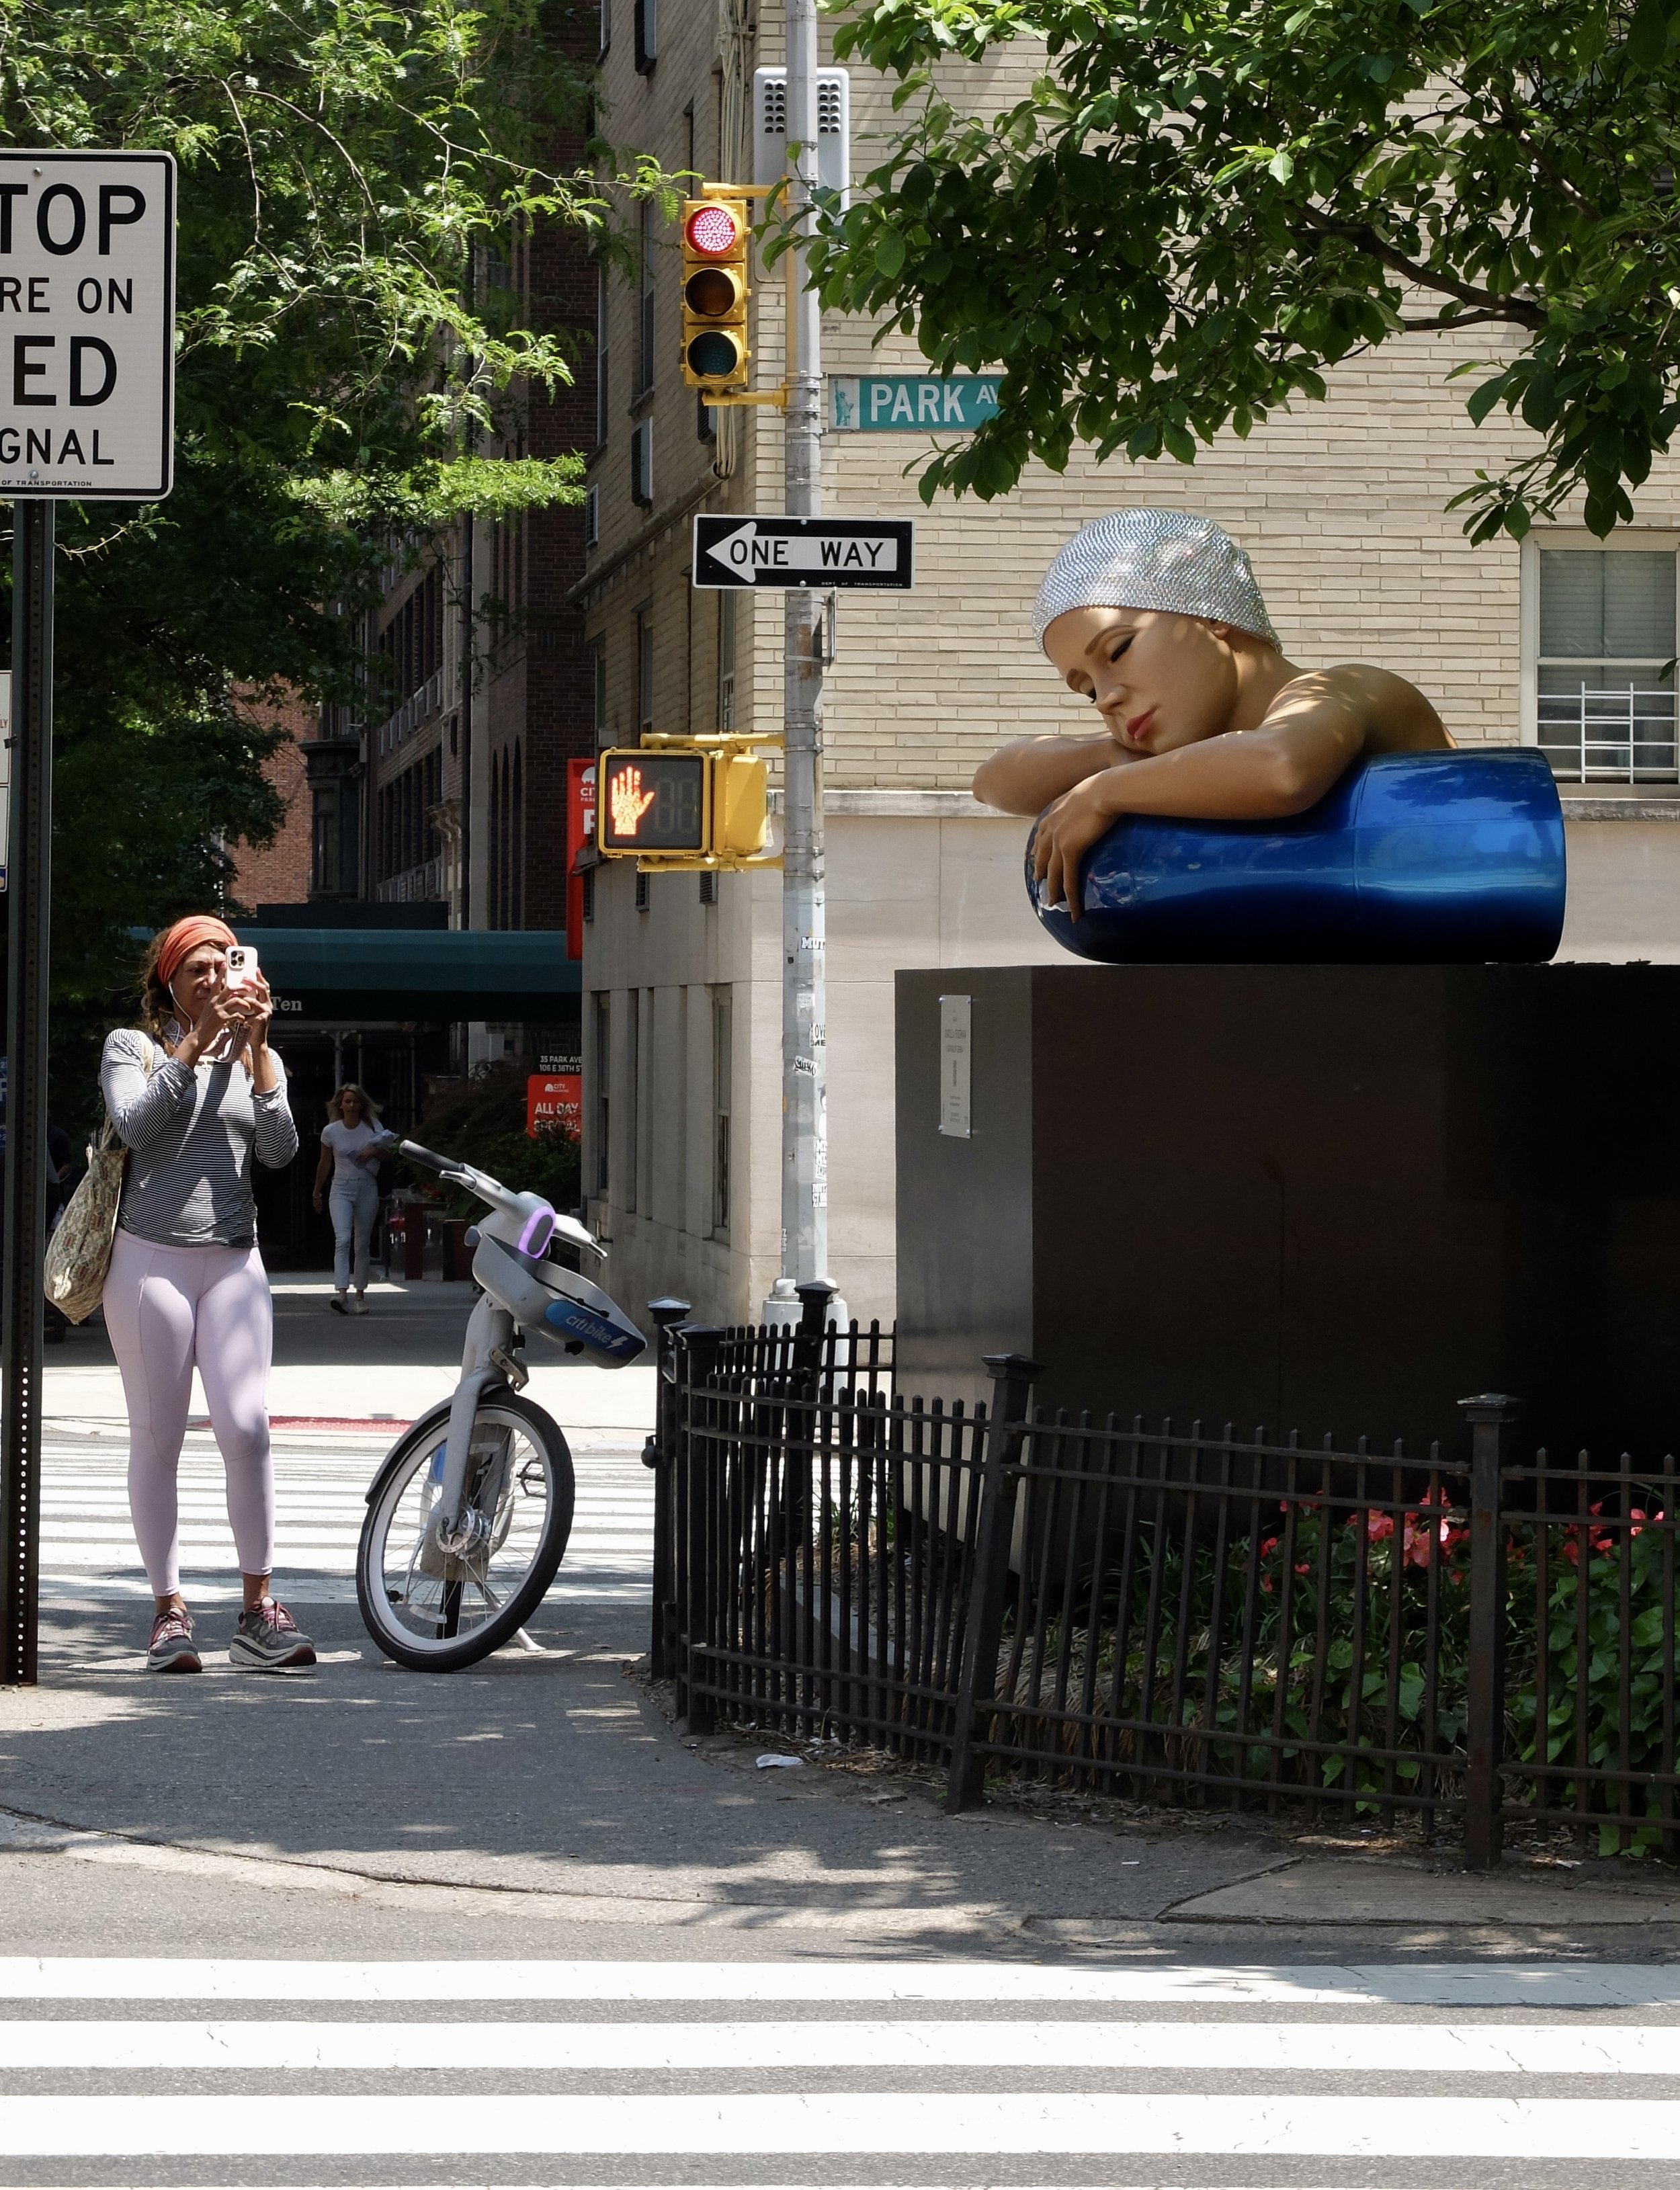    SEA IDYLLS :  Carole Feuerman    Survival of Serena   On the Park Avenue divide between&nbsp;34th St and 39th Street. 